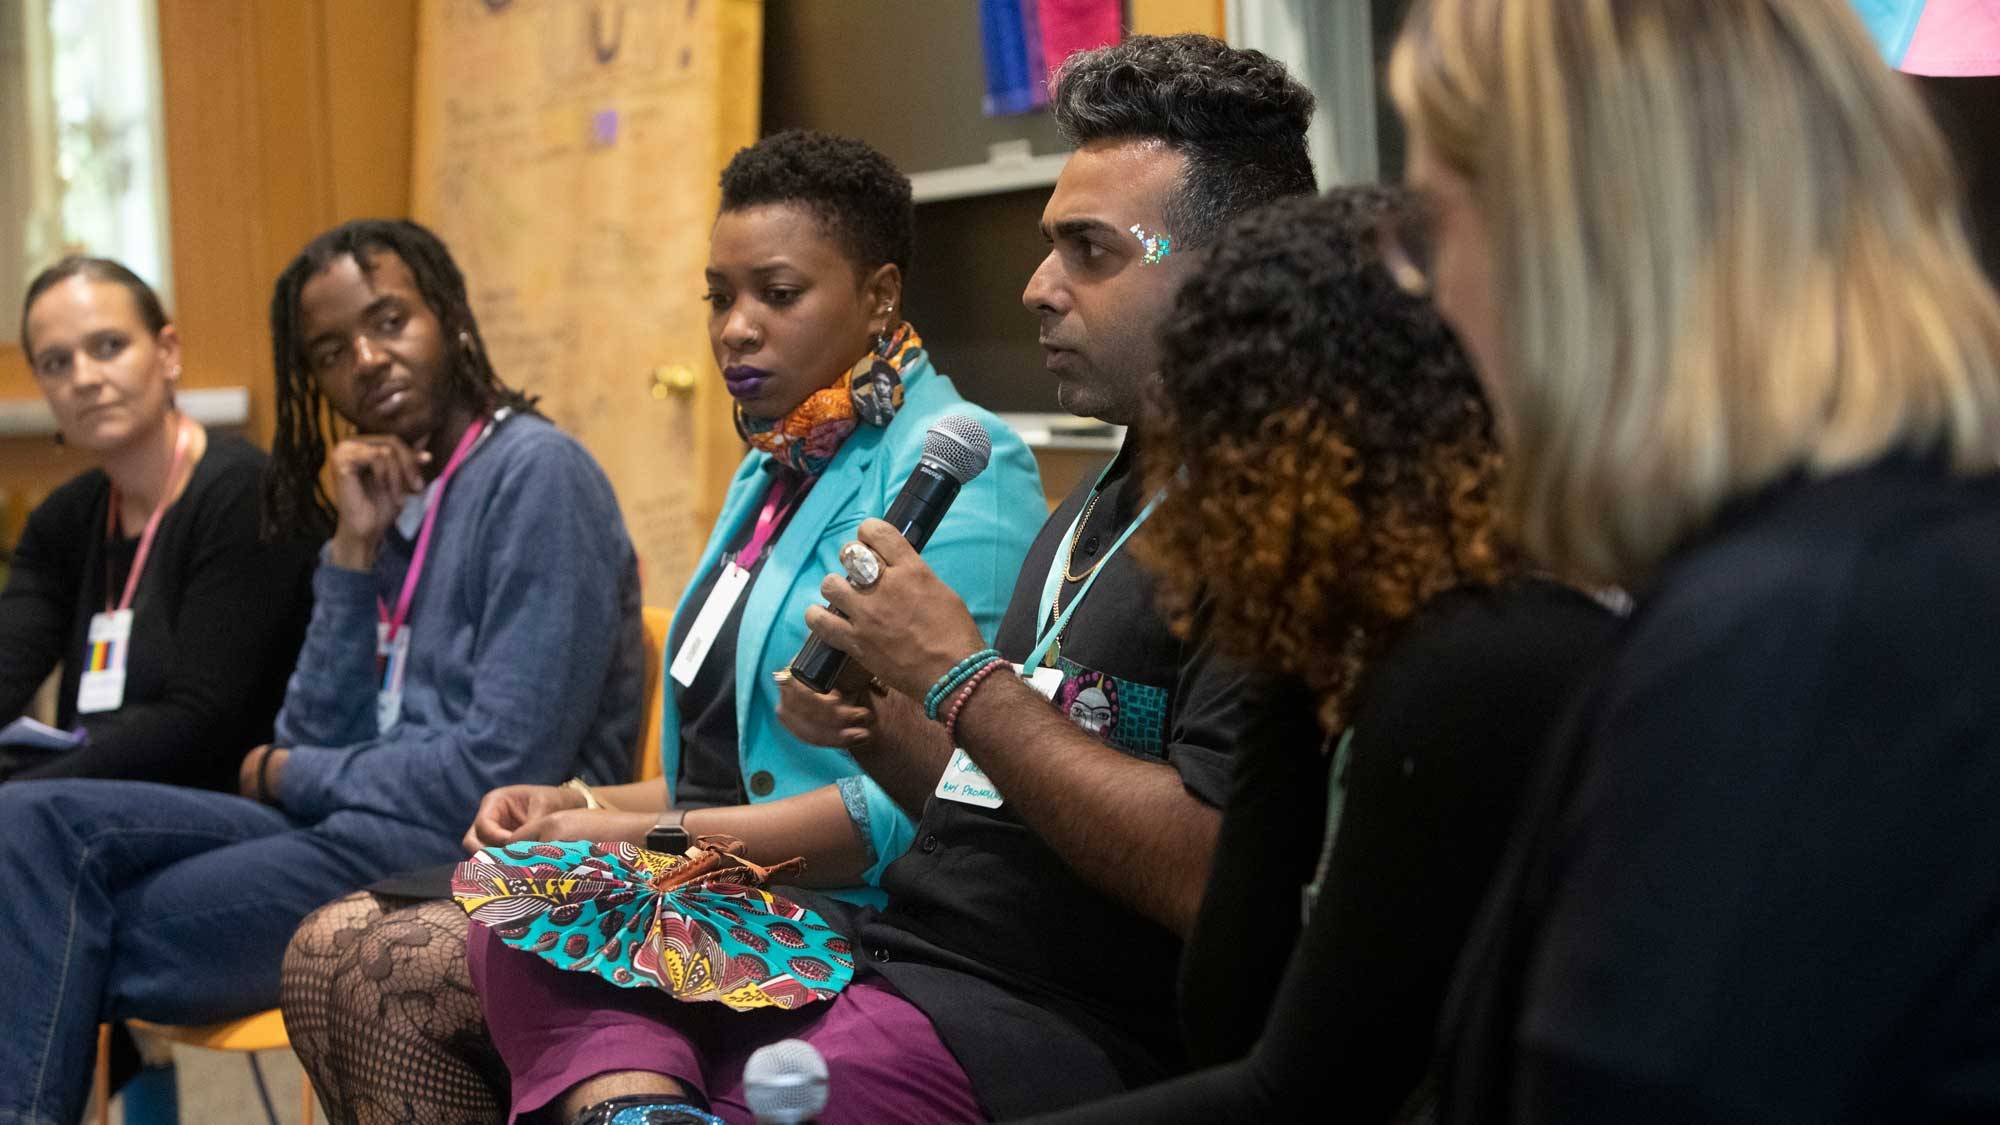 panelists engage in conversation during a celebration of LGBTQ Studies' 10th anniversary